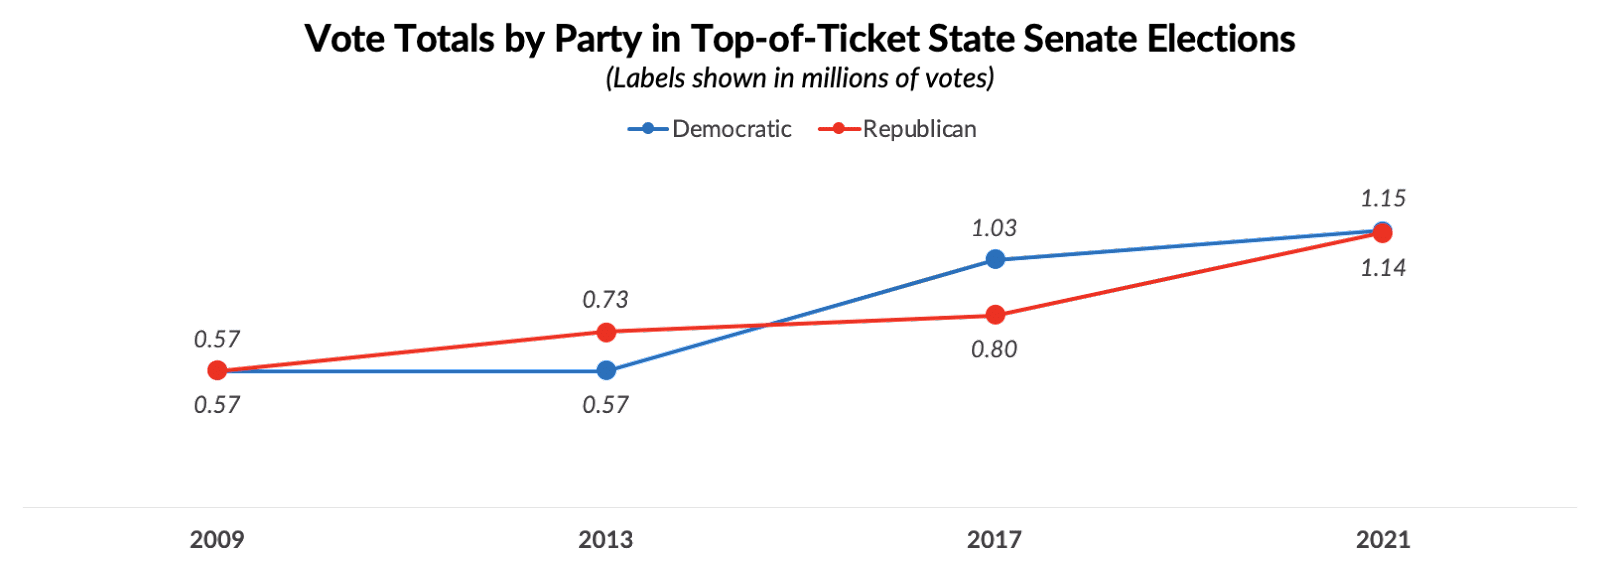 Vote Totals by Party in Top-of-Ticket State Senate Elections